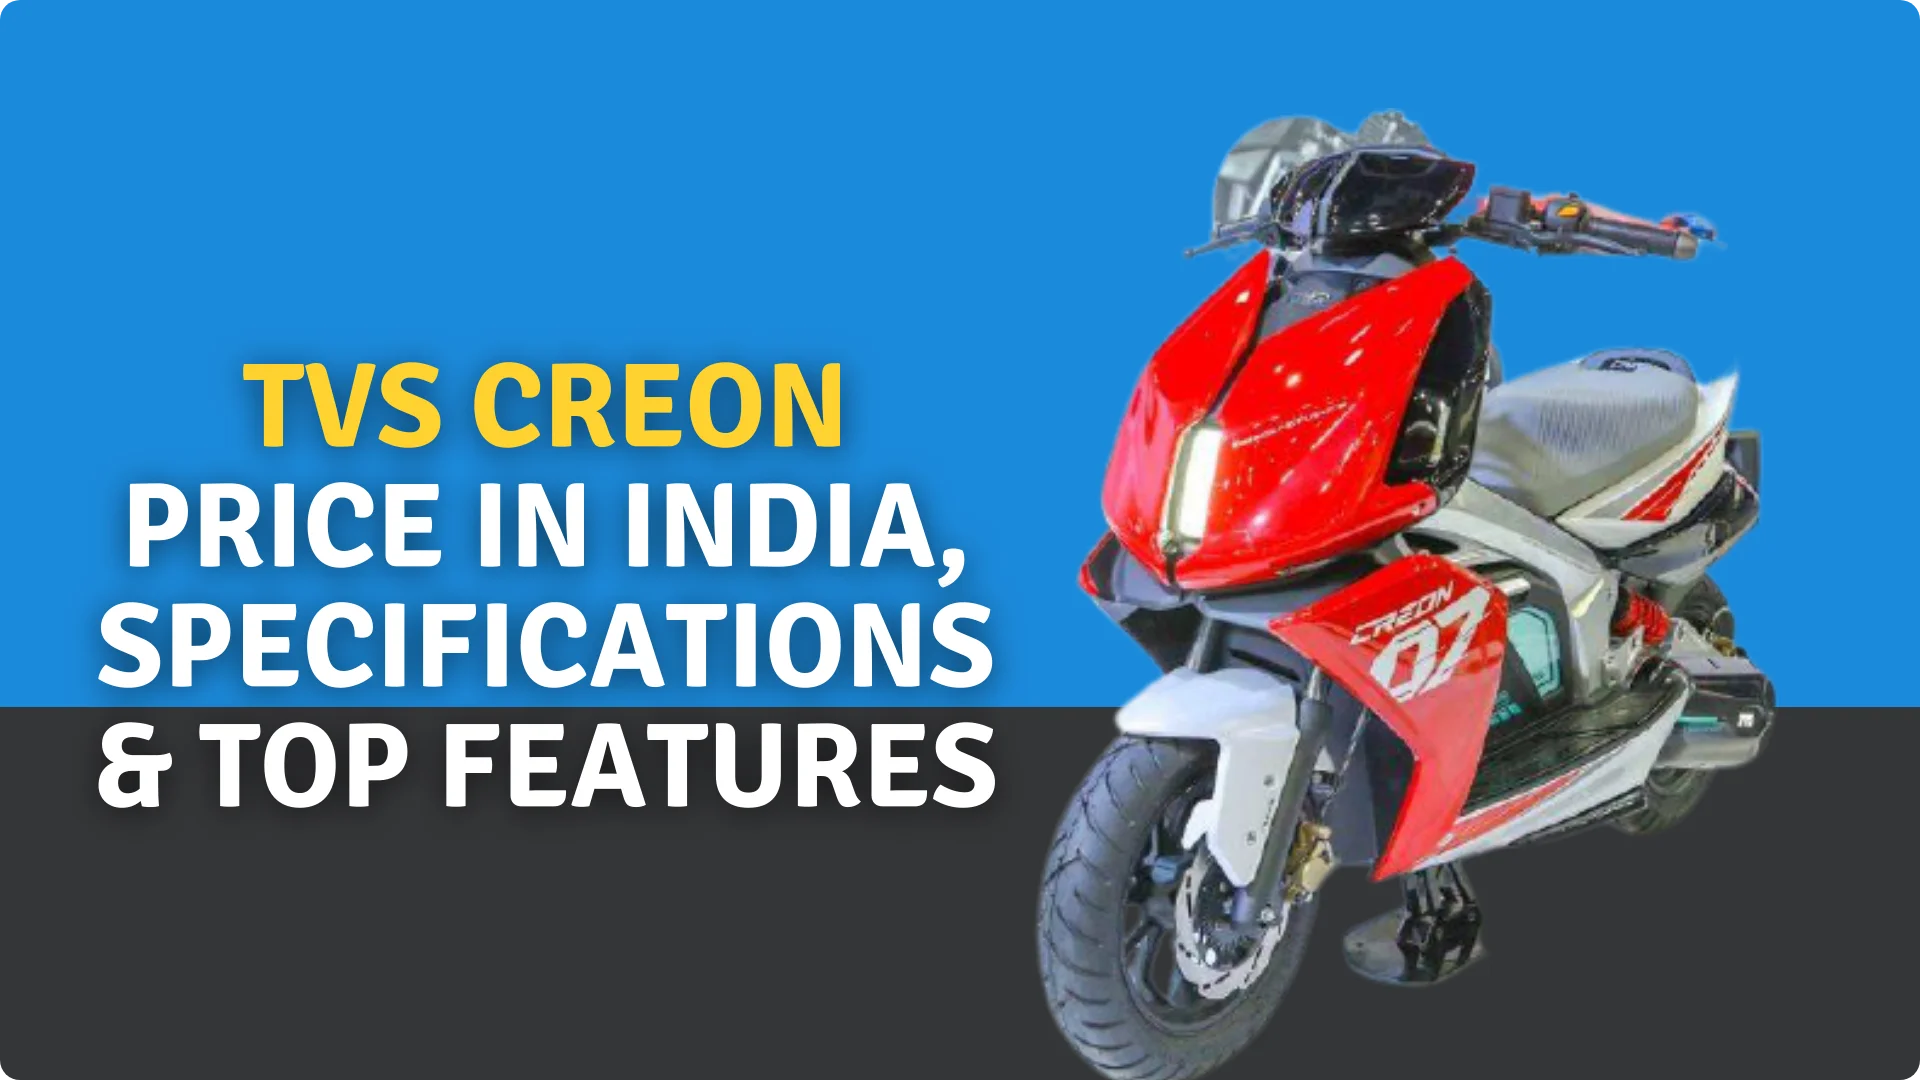 https://e-vehicleinfo.com/tvs-creon-price-in-india-specifications-top-features/